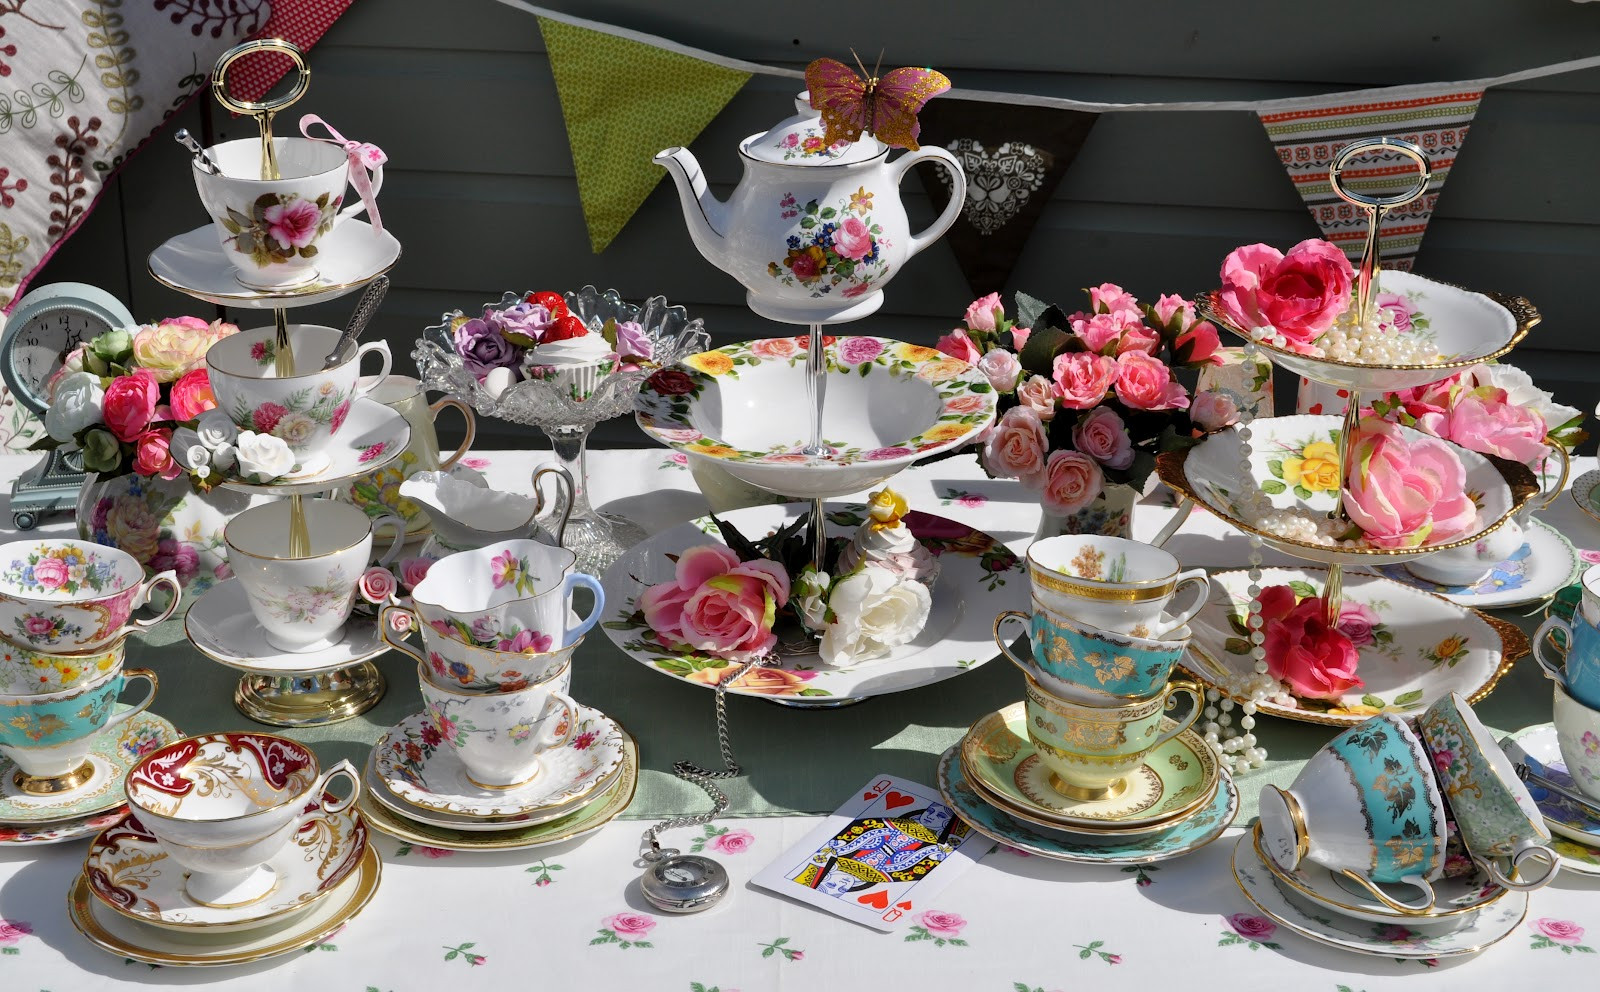 Vintage Tea Party Birthday Ideas
 cake stand heaven Mismatched Teacups and Cake Stands for